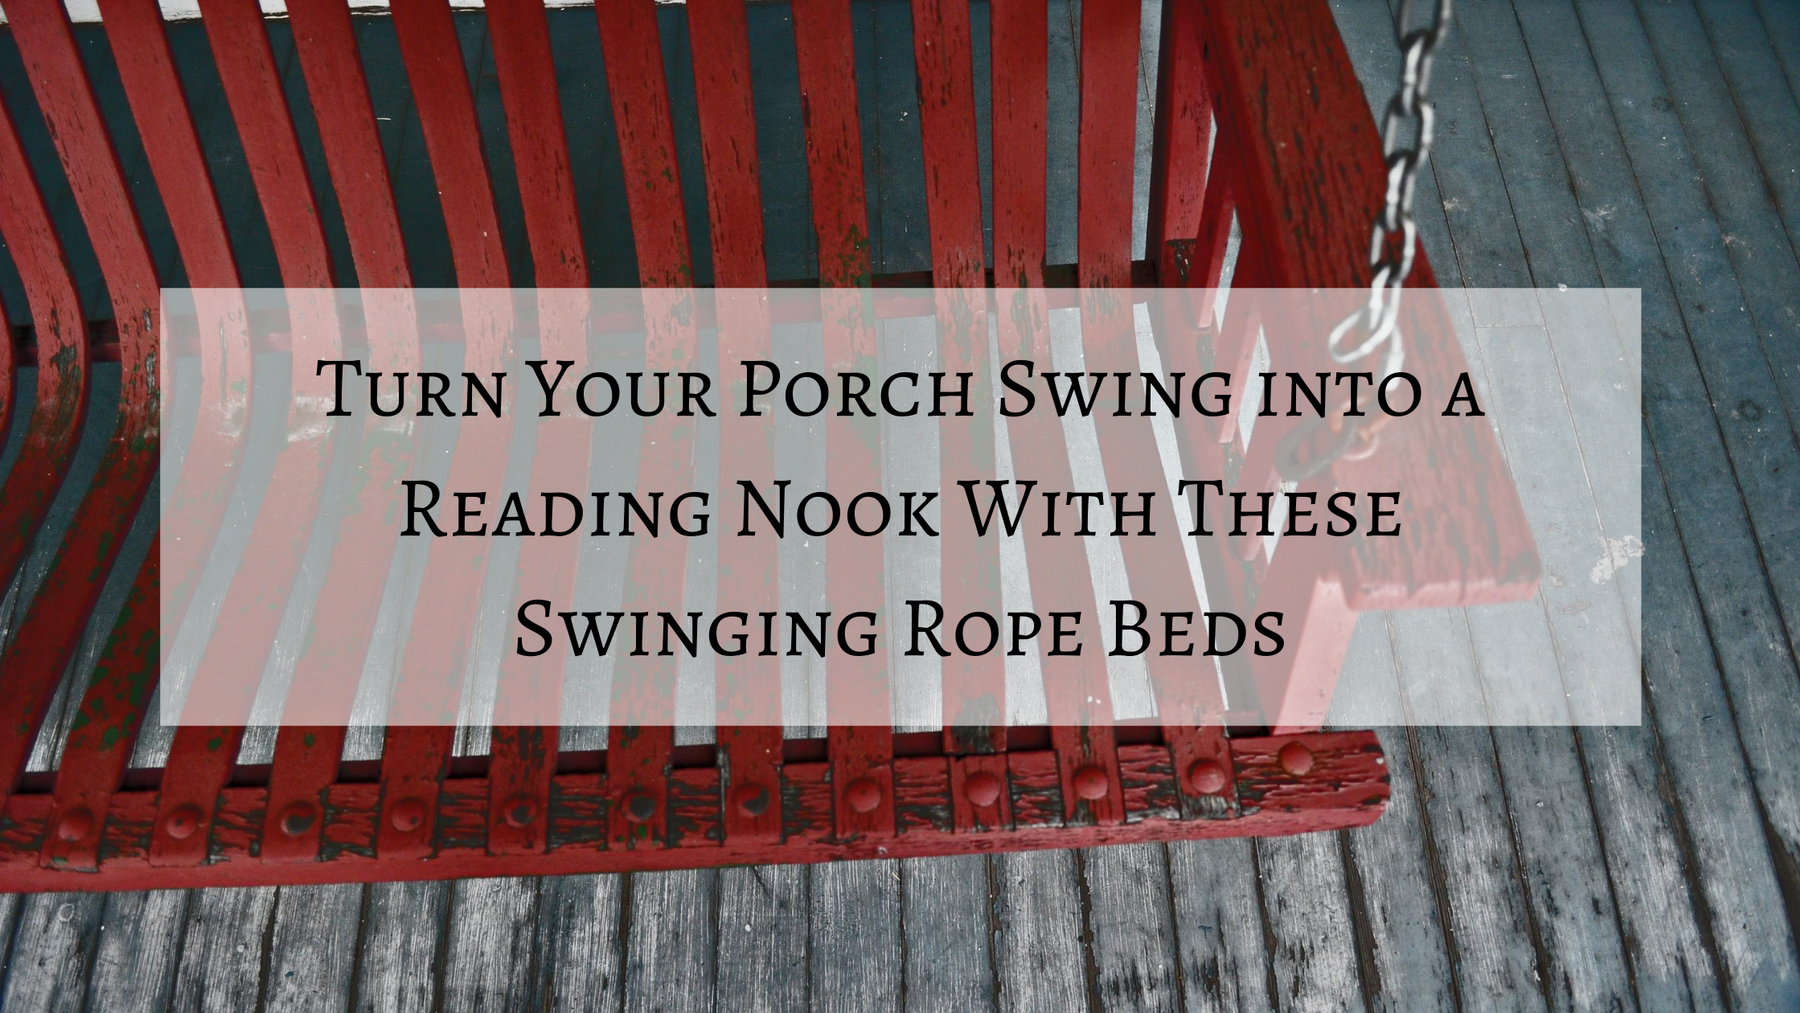 Turn Your Porch Swing into a Reading Nook With These Swinging Rope Beds